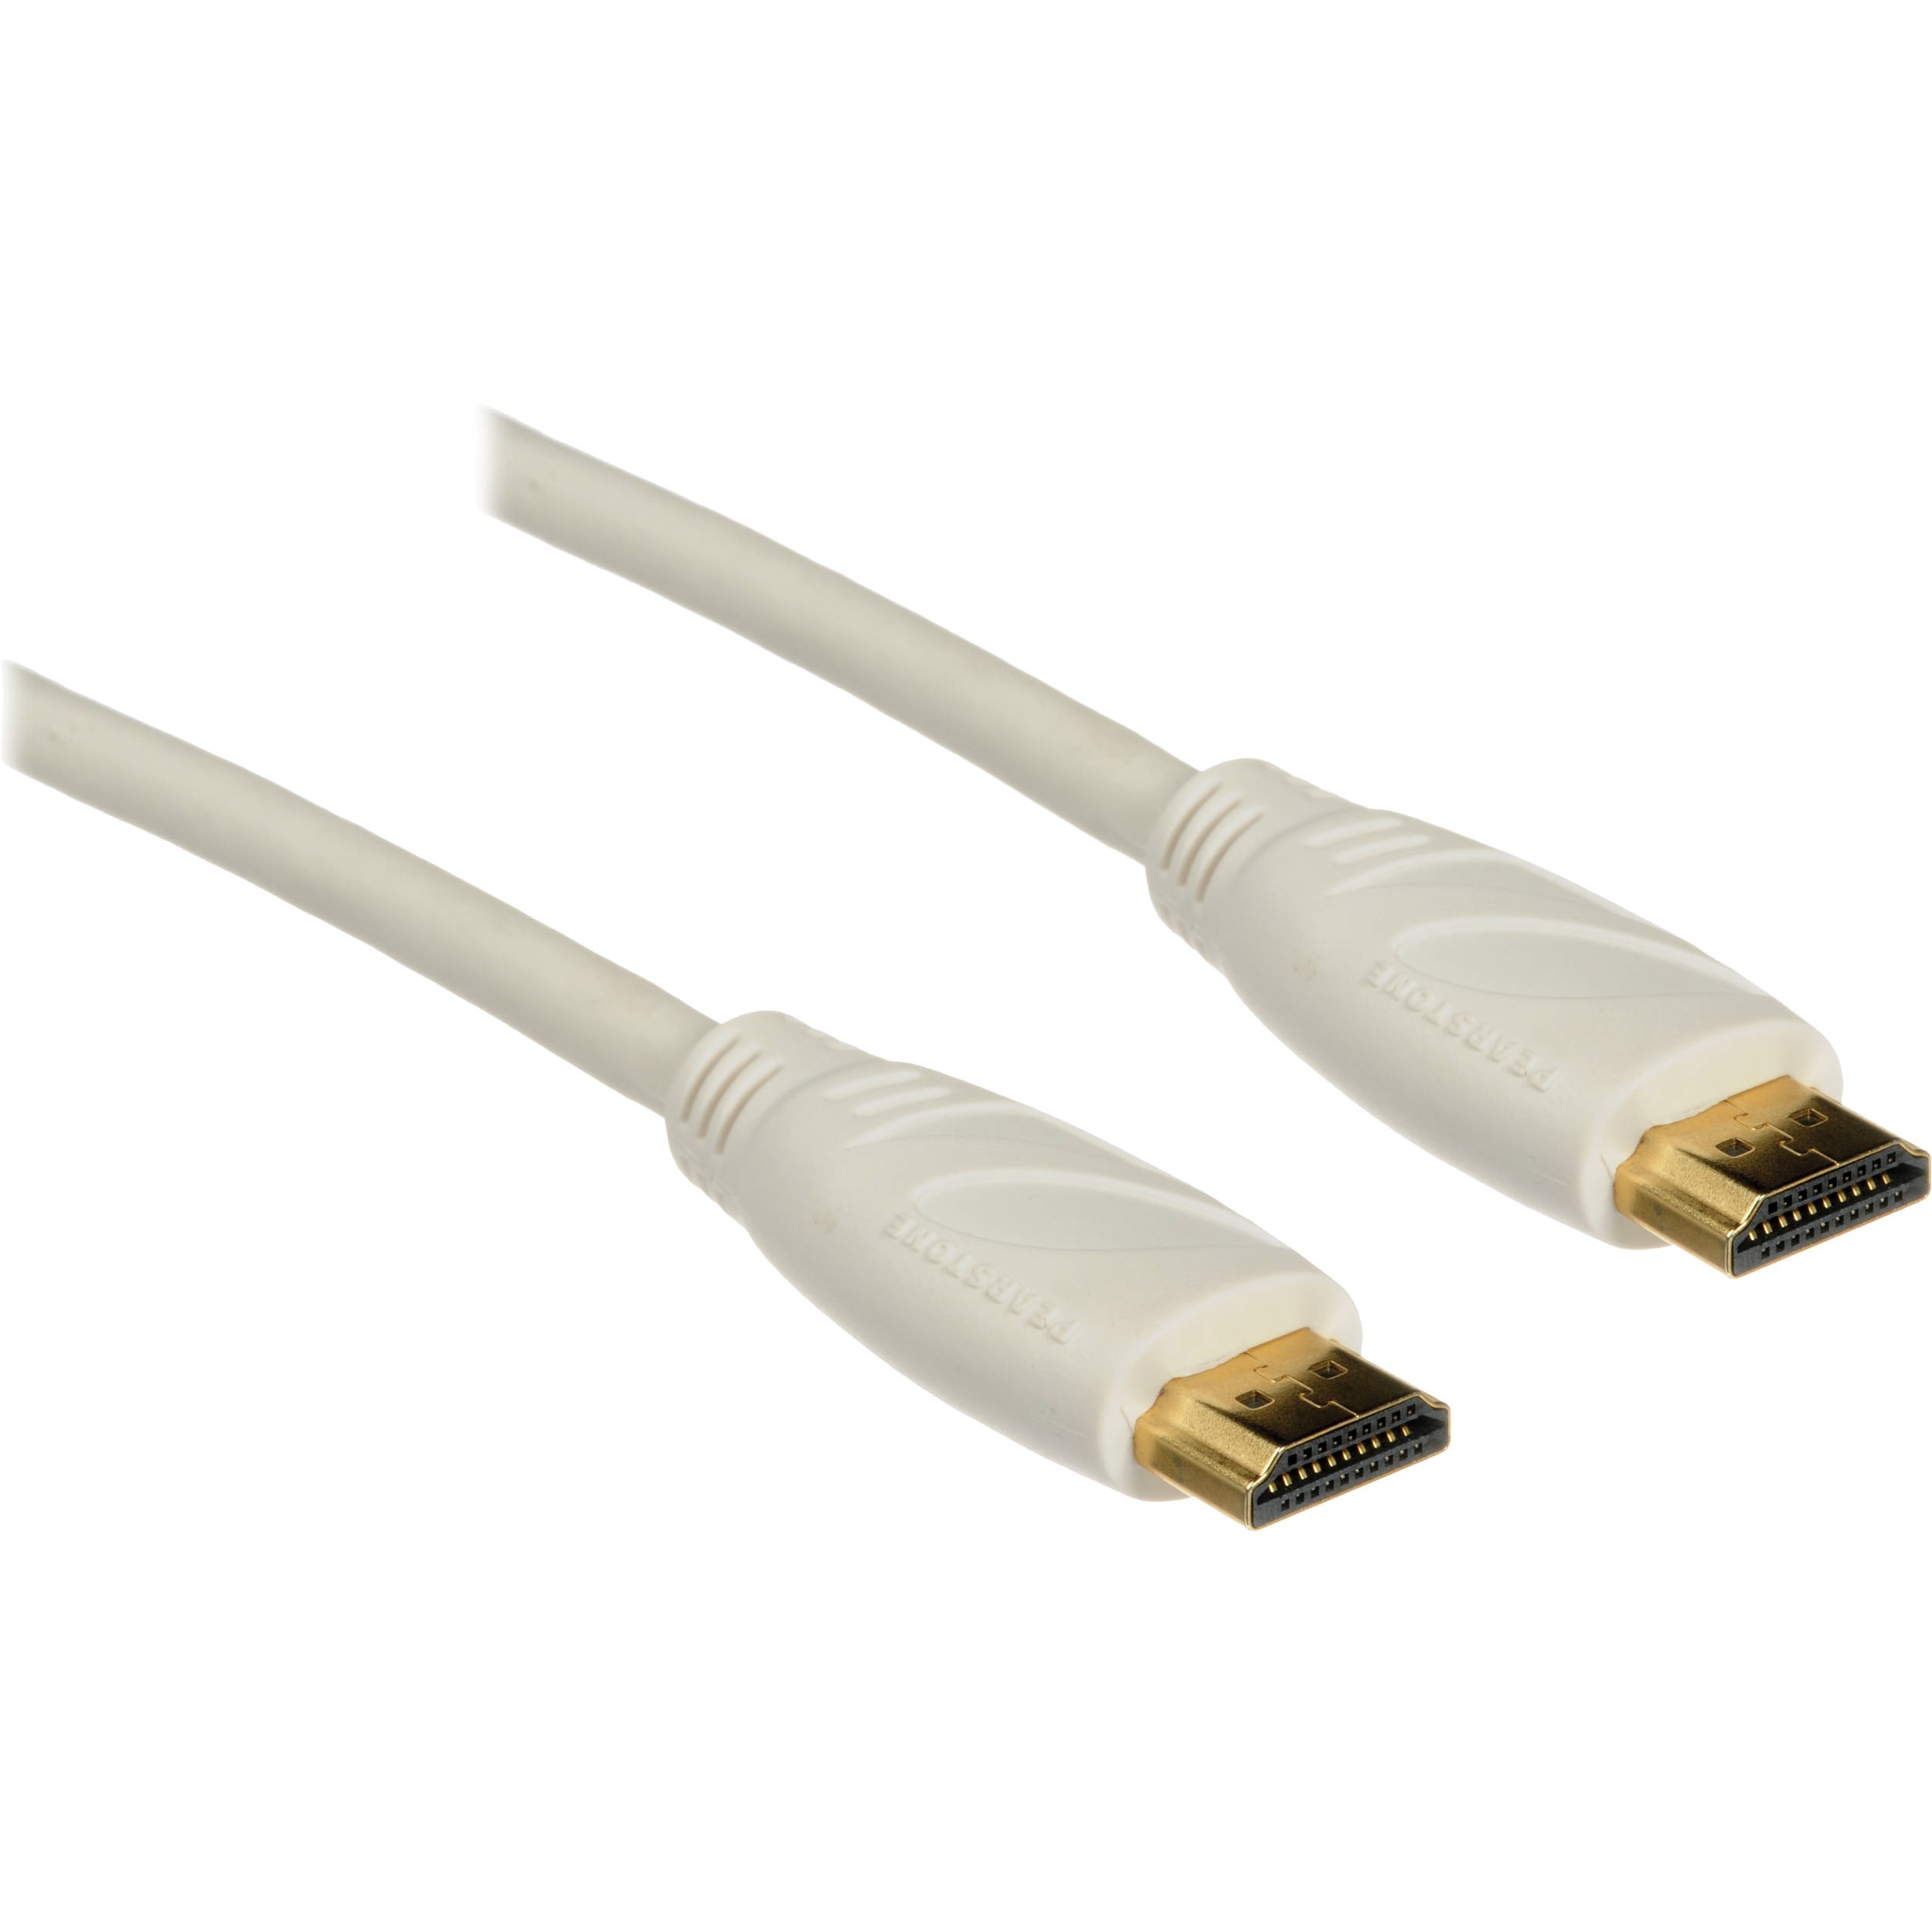 Pearstone HDA-110W High-Speed HDMI Cable with Ethernet (White, 10')